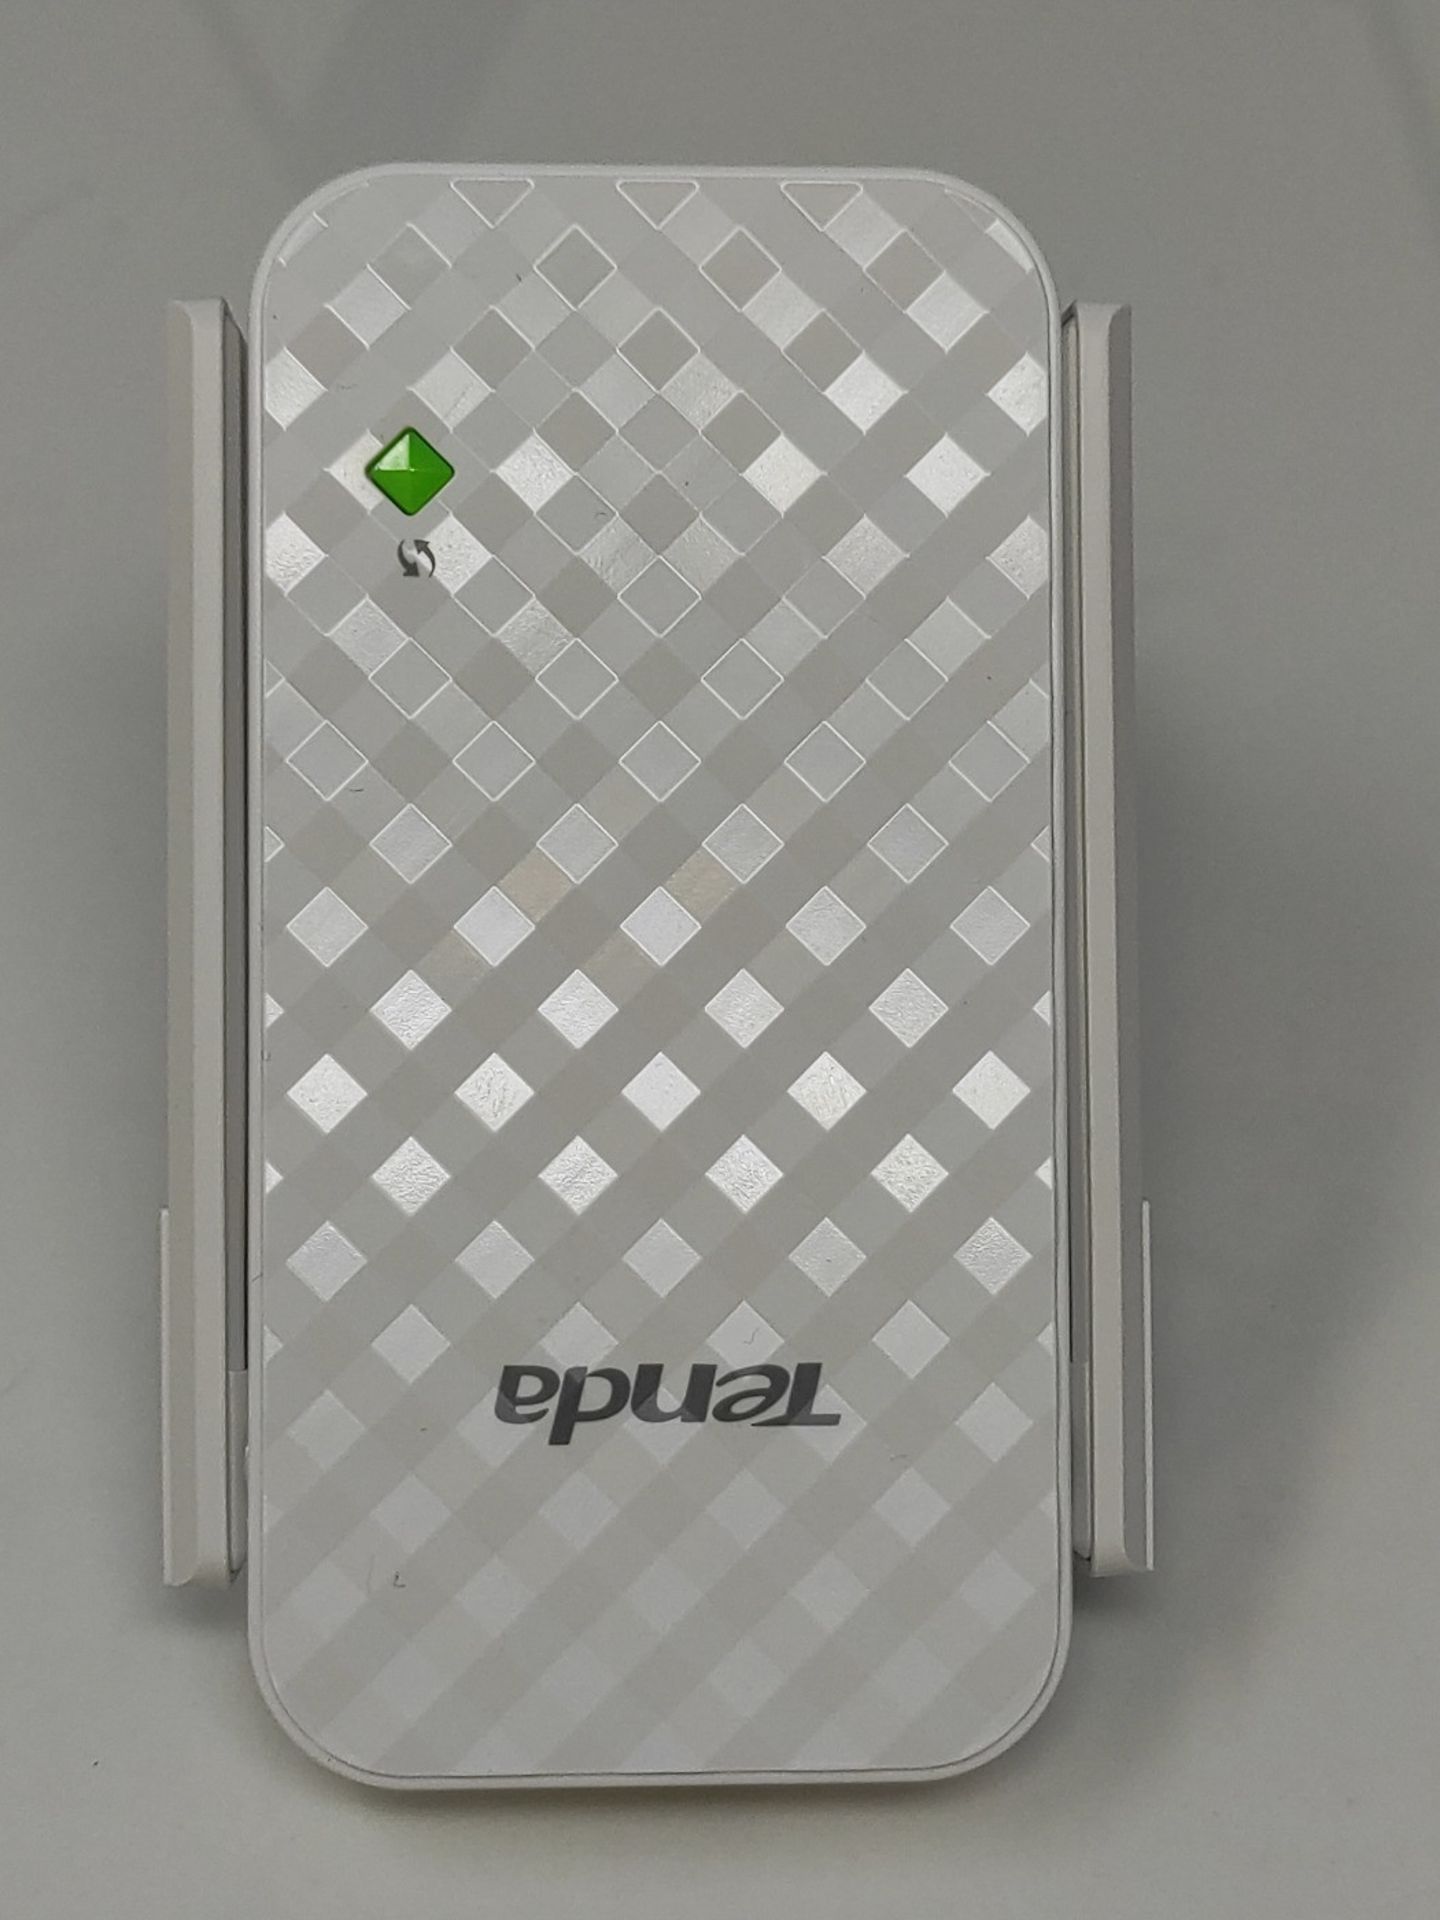 Tenda WLAN Repeater WLAN Amplifier WiFi Repeater (N300 2.4GHz: 300 Mbps), 2 * 3dBi Ext - Image 3 of 3